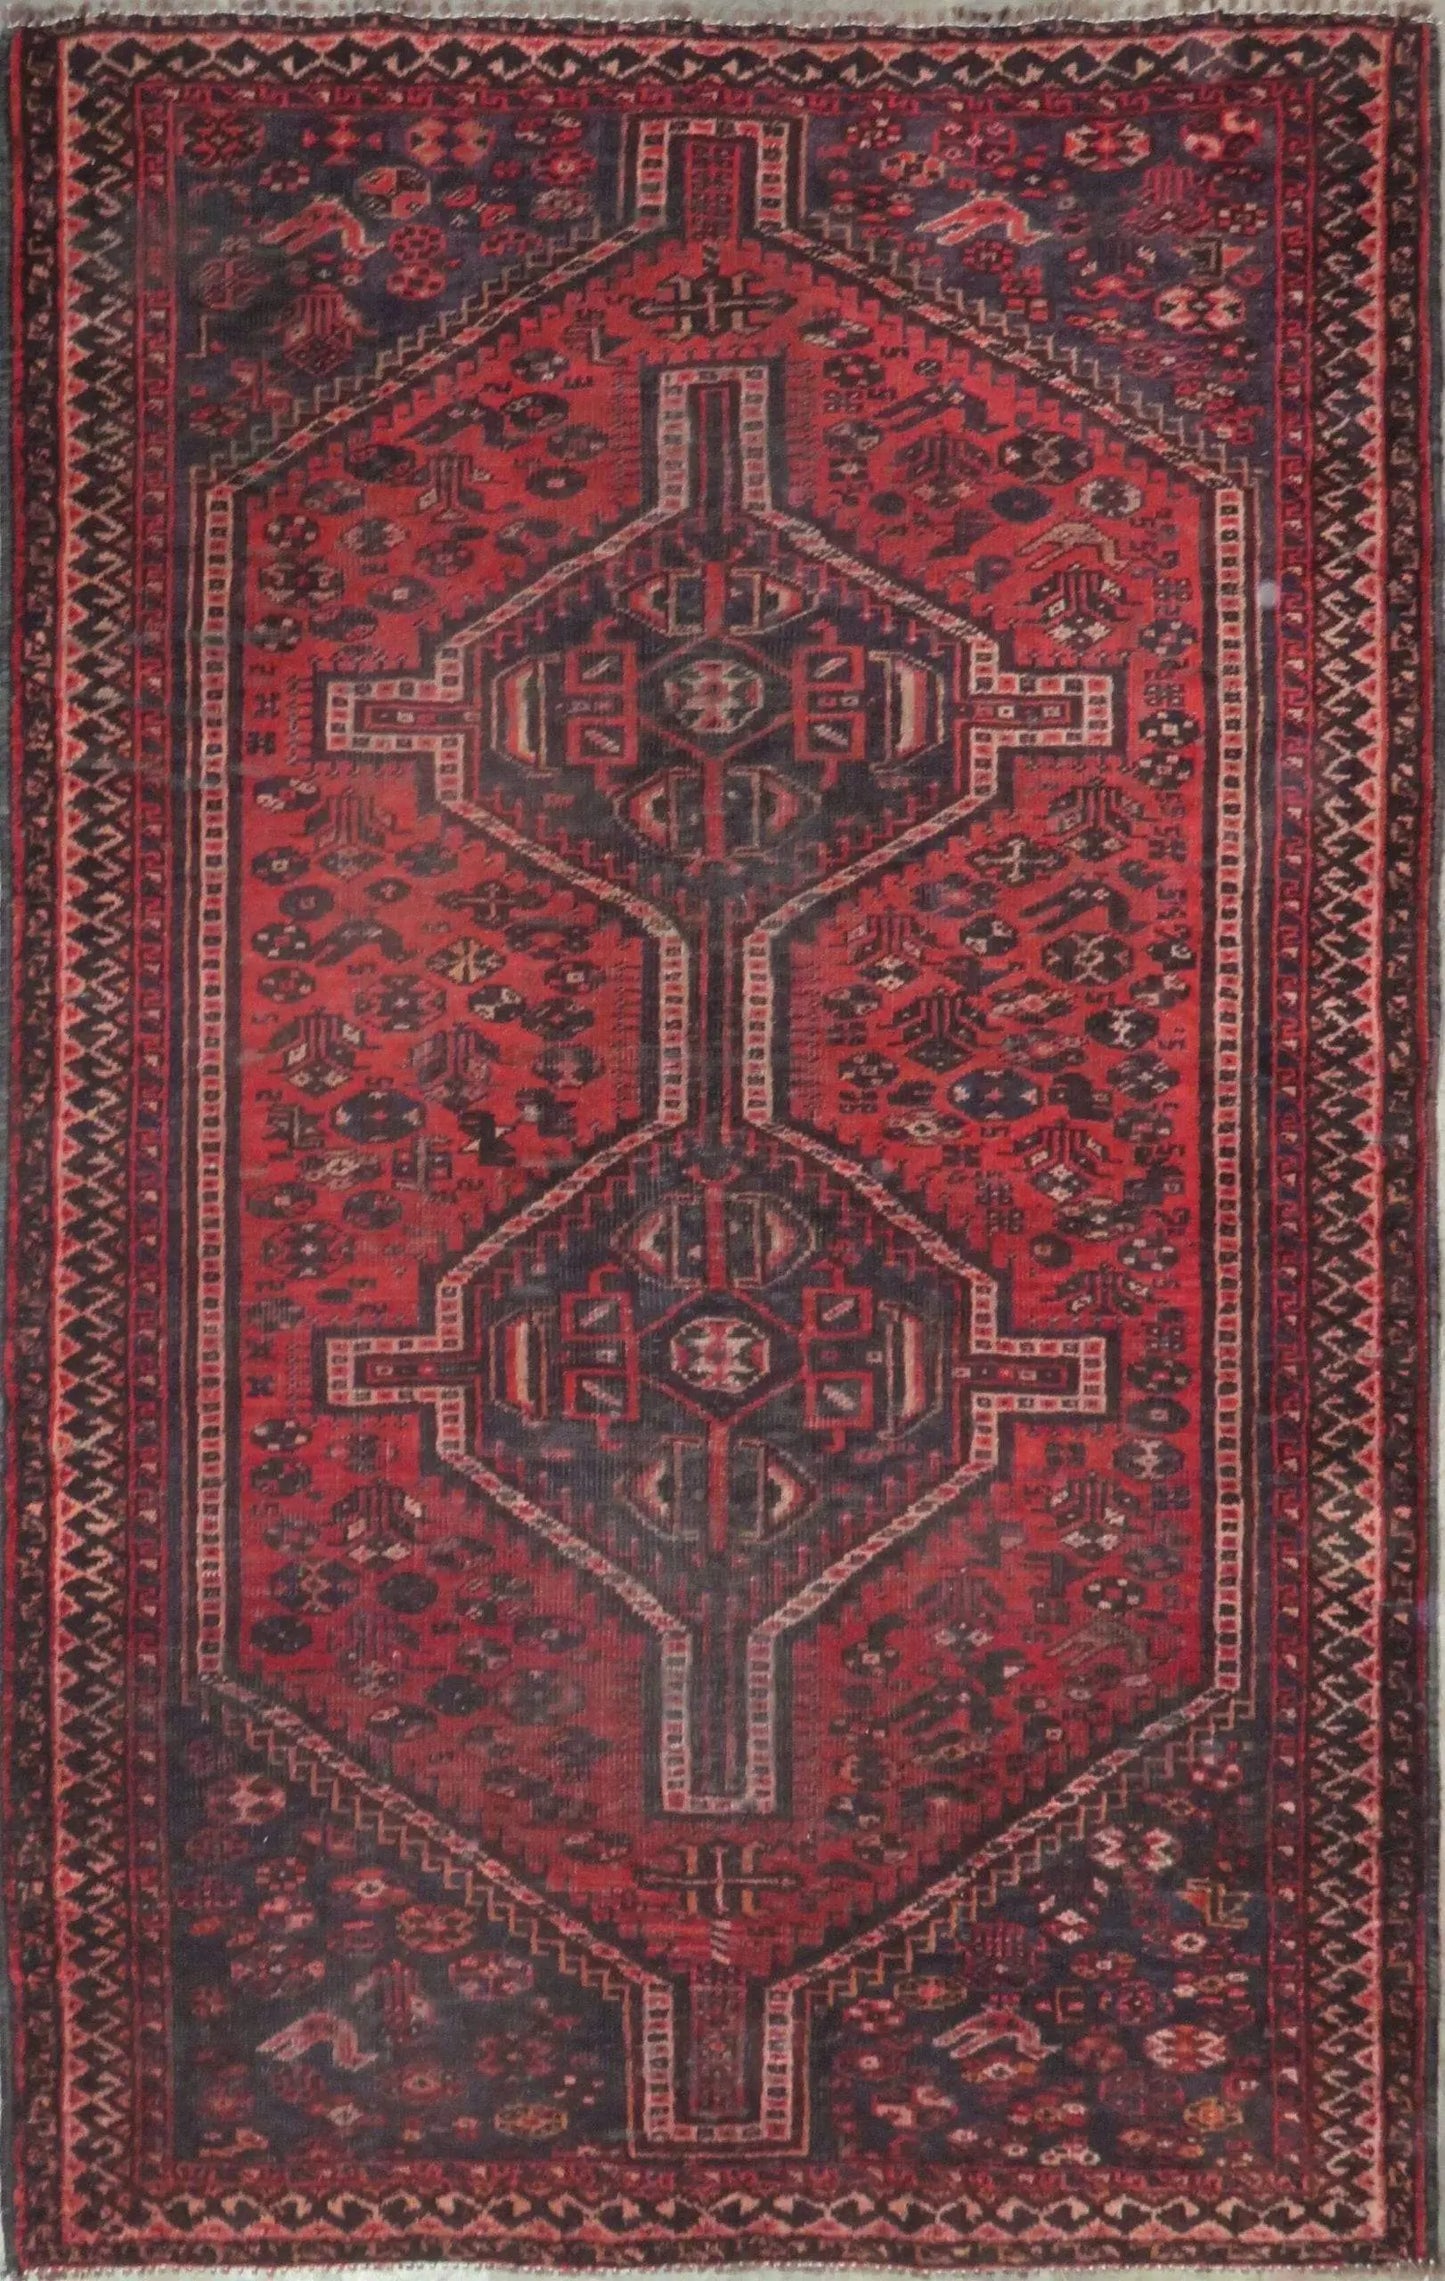 Hand-Knotted Persian Wool Rug _ Luxurious Vintage Design, 7'4" x 4'9", Artisan Crafted